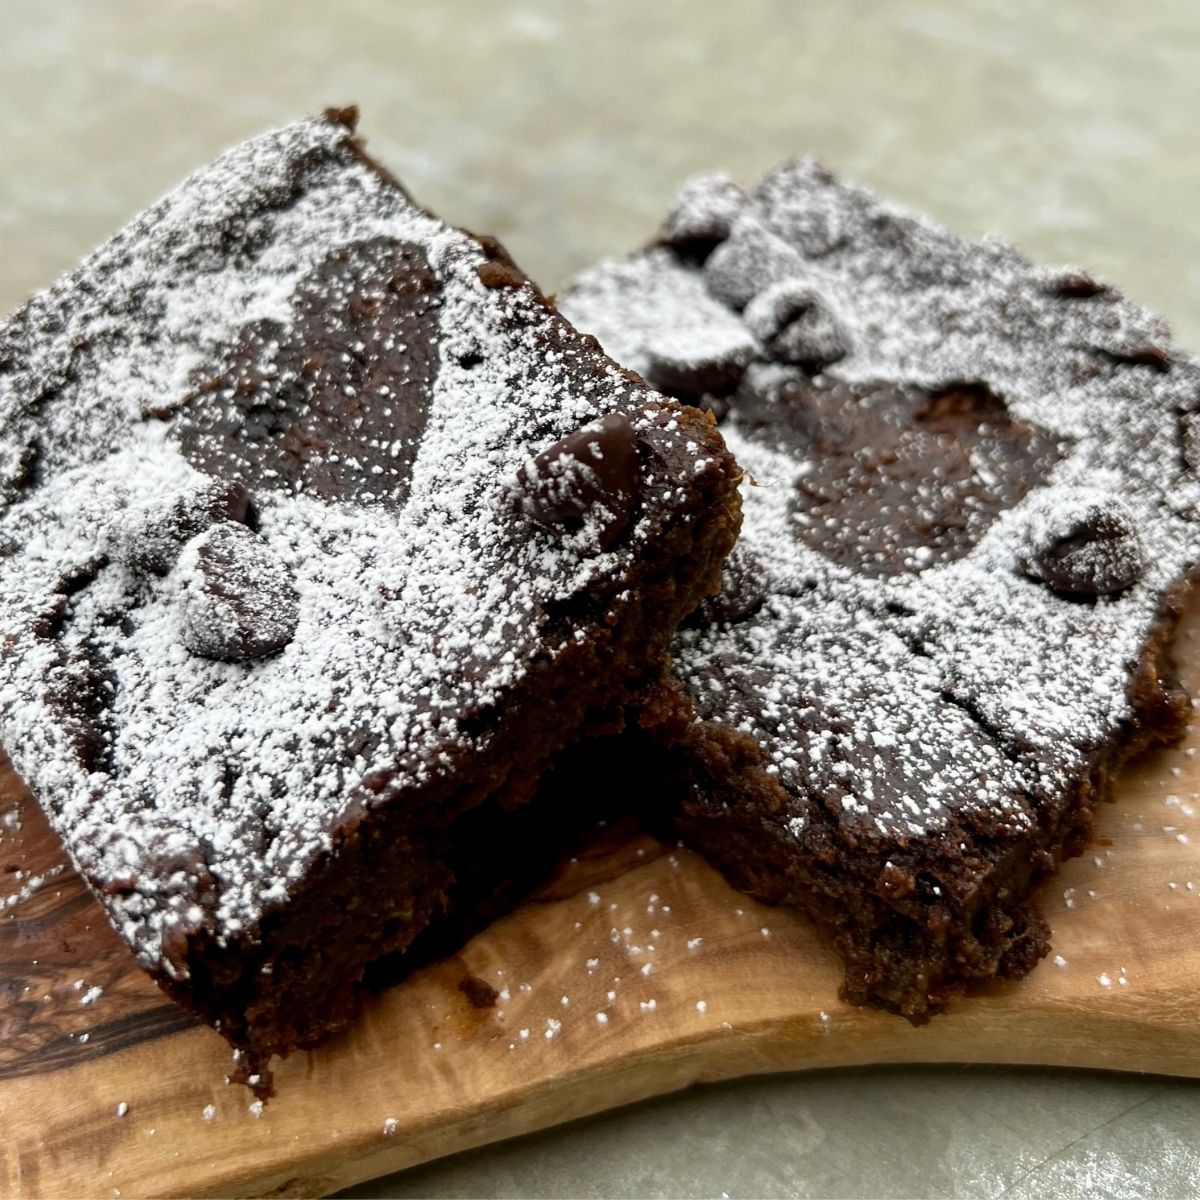 Two powdered sugar covered brownies on a piece of wood